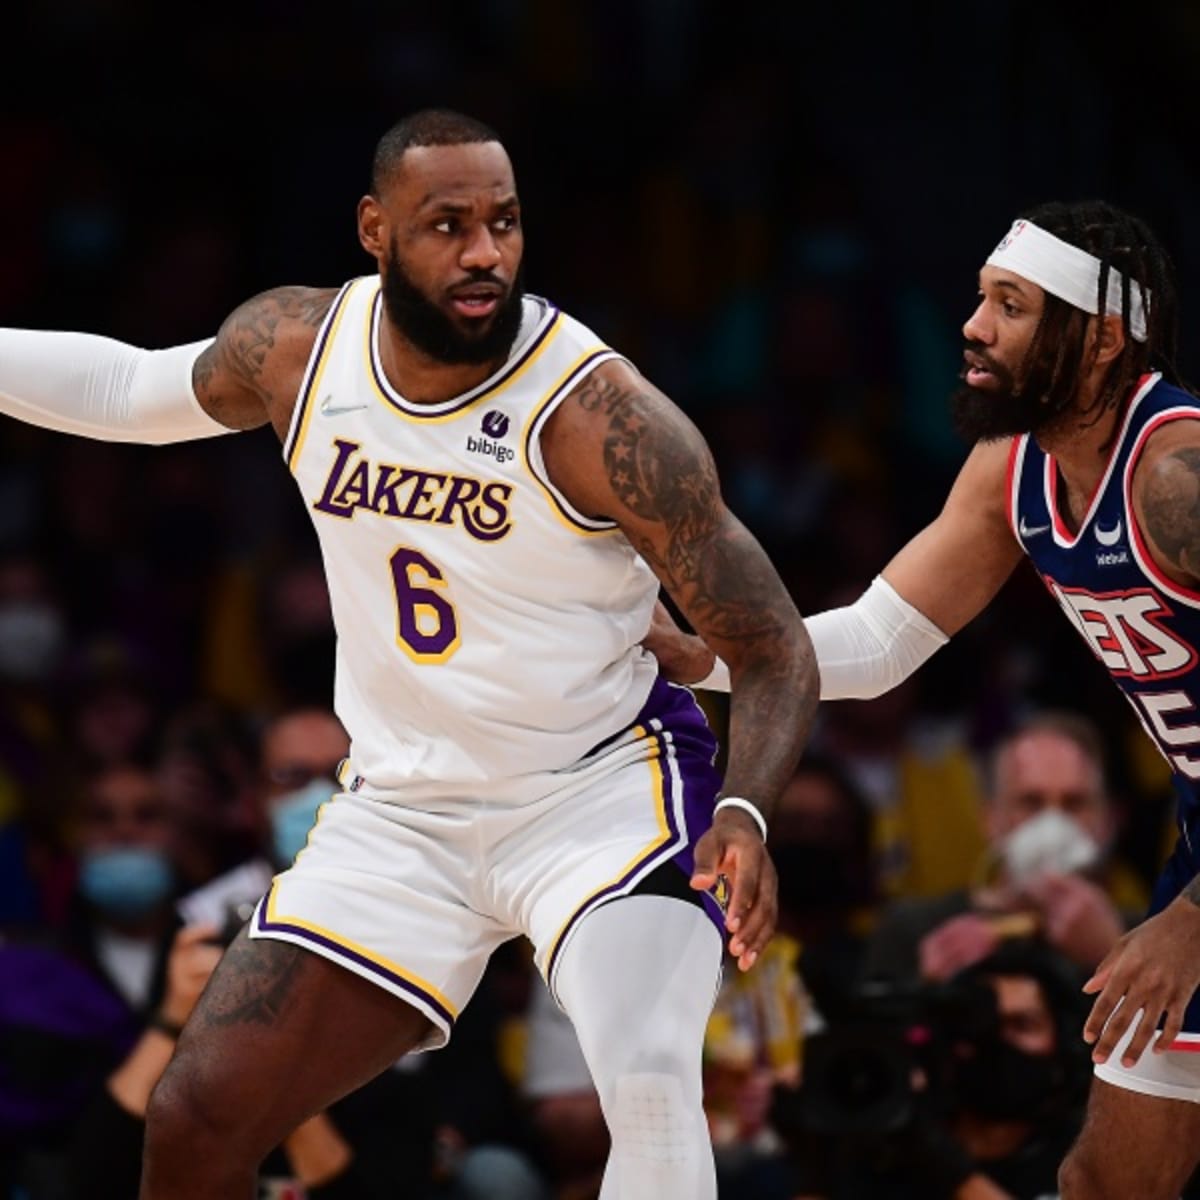 La Lakers SQUAD - #REPORT: LeBron James will be switching back to